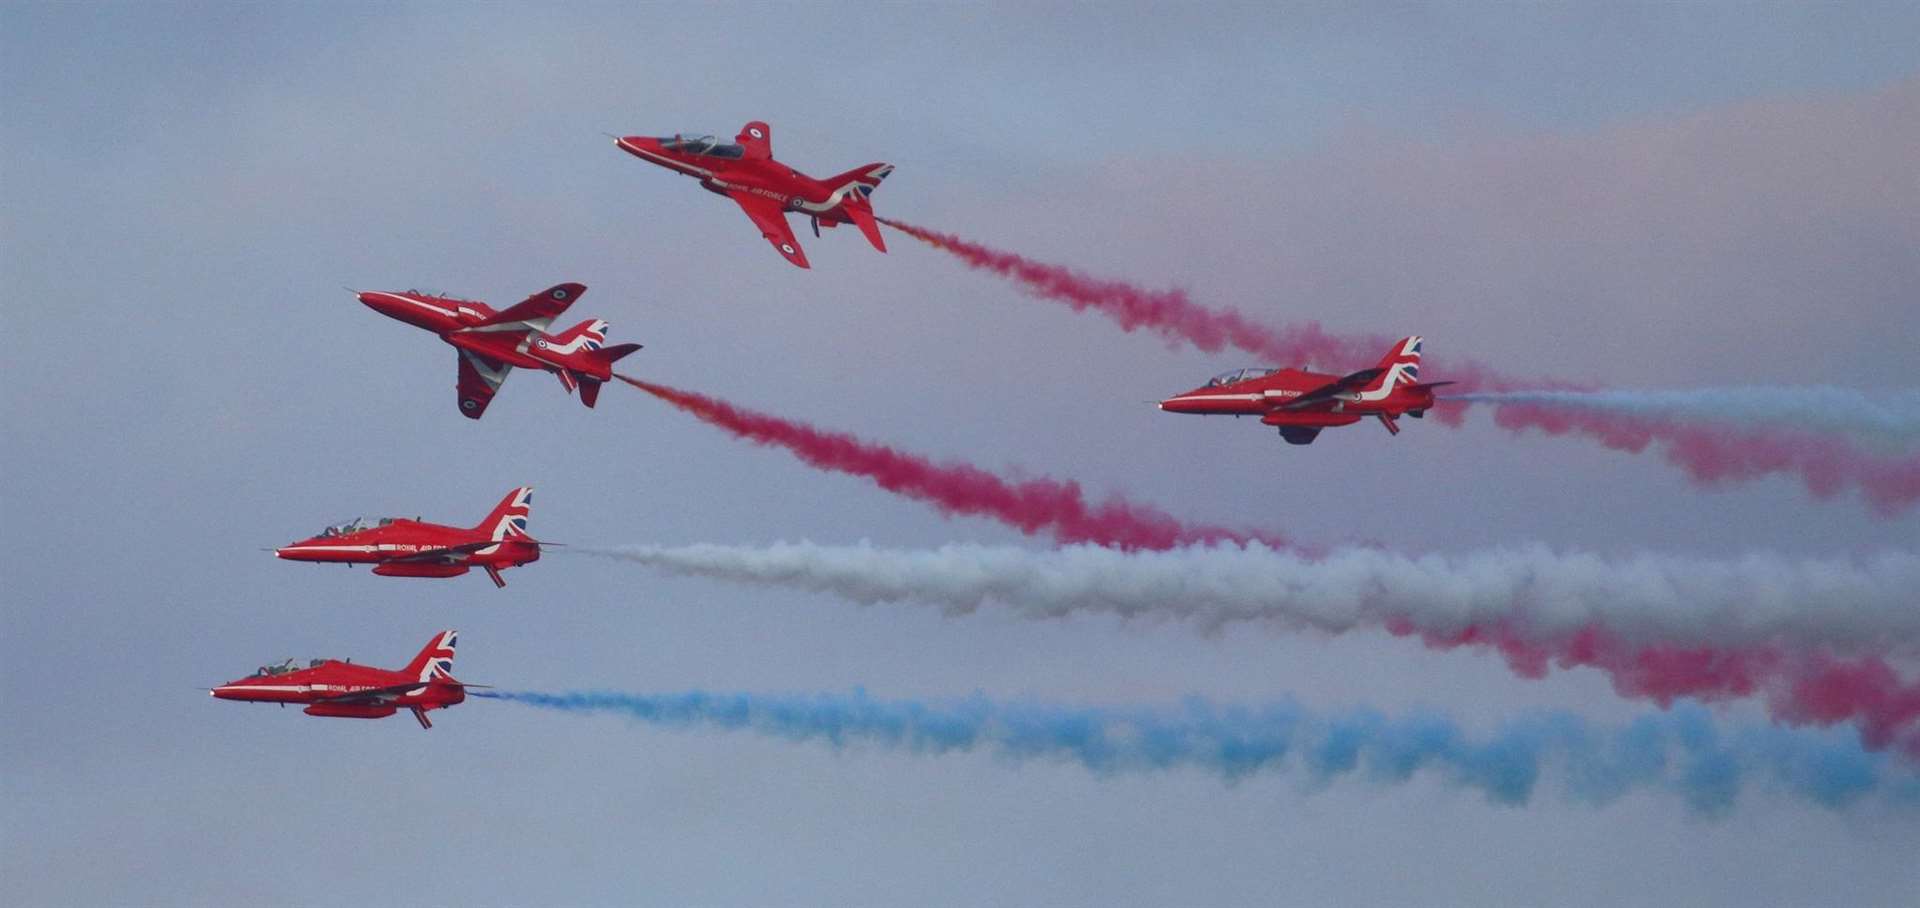 The Red Arrows will be performing in the skies over Portsoy this summer. Picture: David Porter